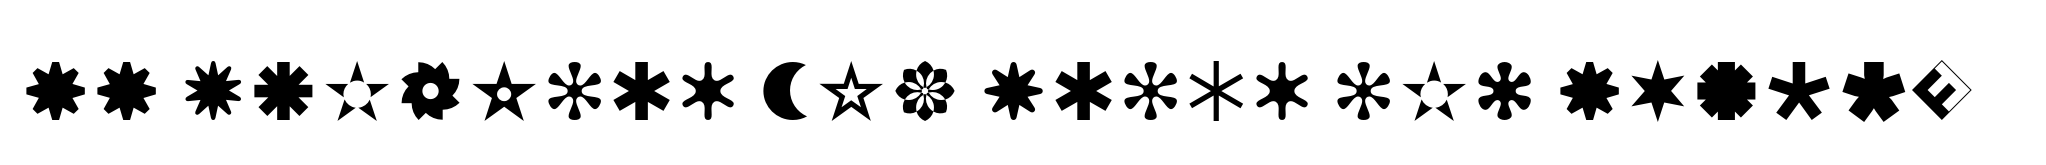 FF Dingbats 2.0 Stars and Flowers image